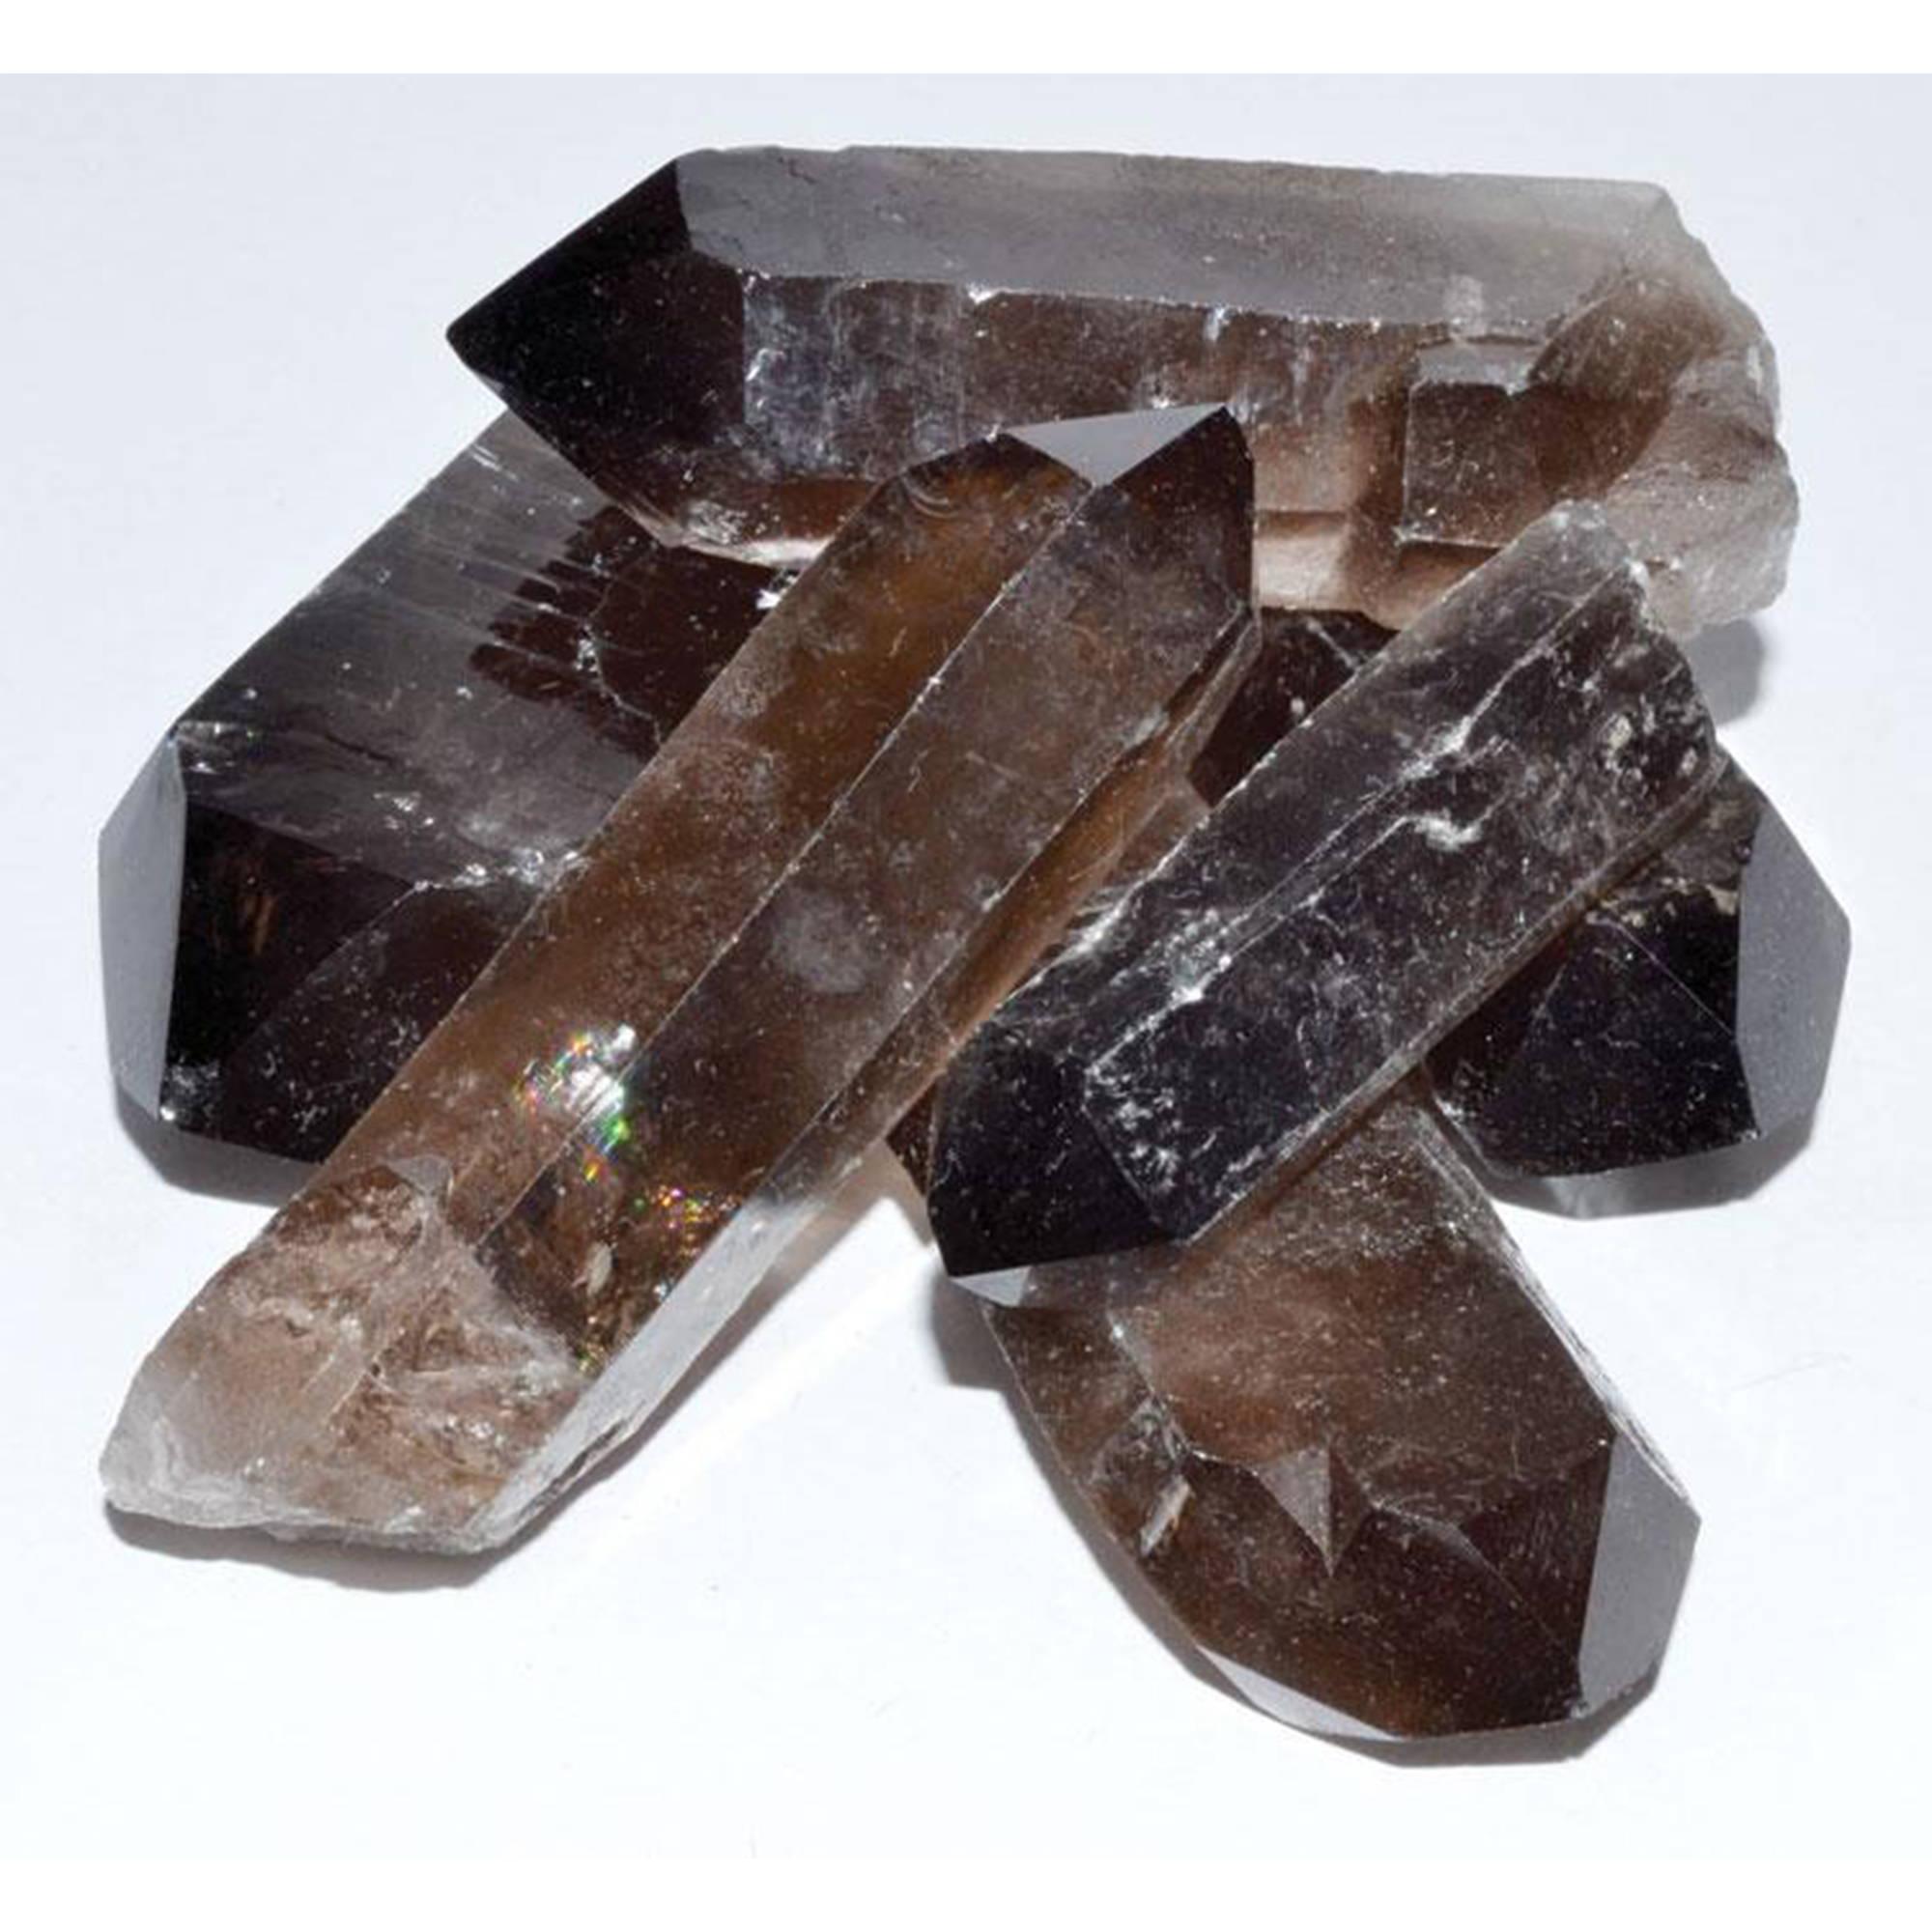 Buy Healing Crystals Online USA, Purchase Rocks Online USA - The Foxes Den